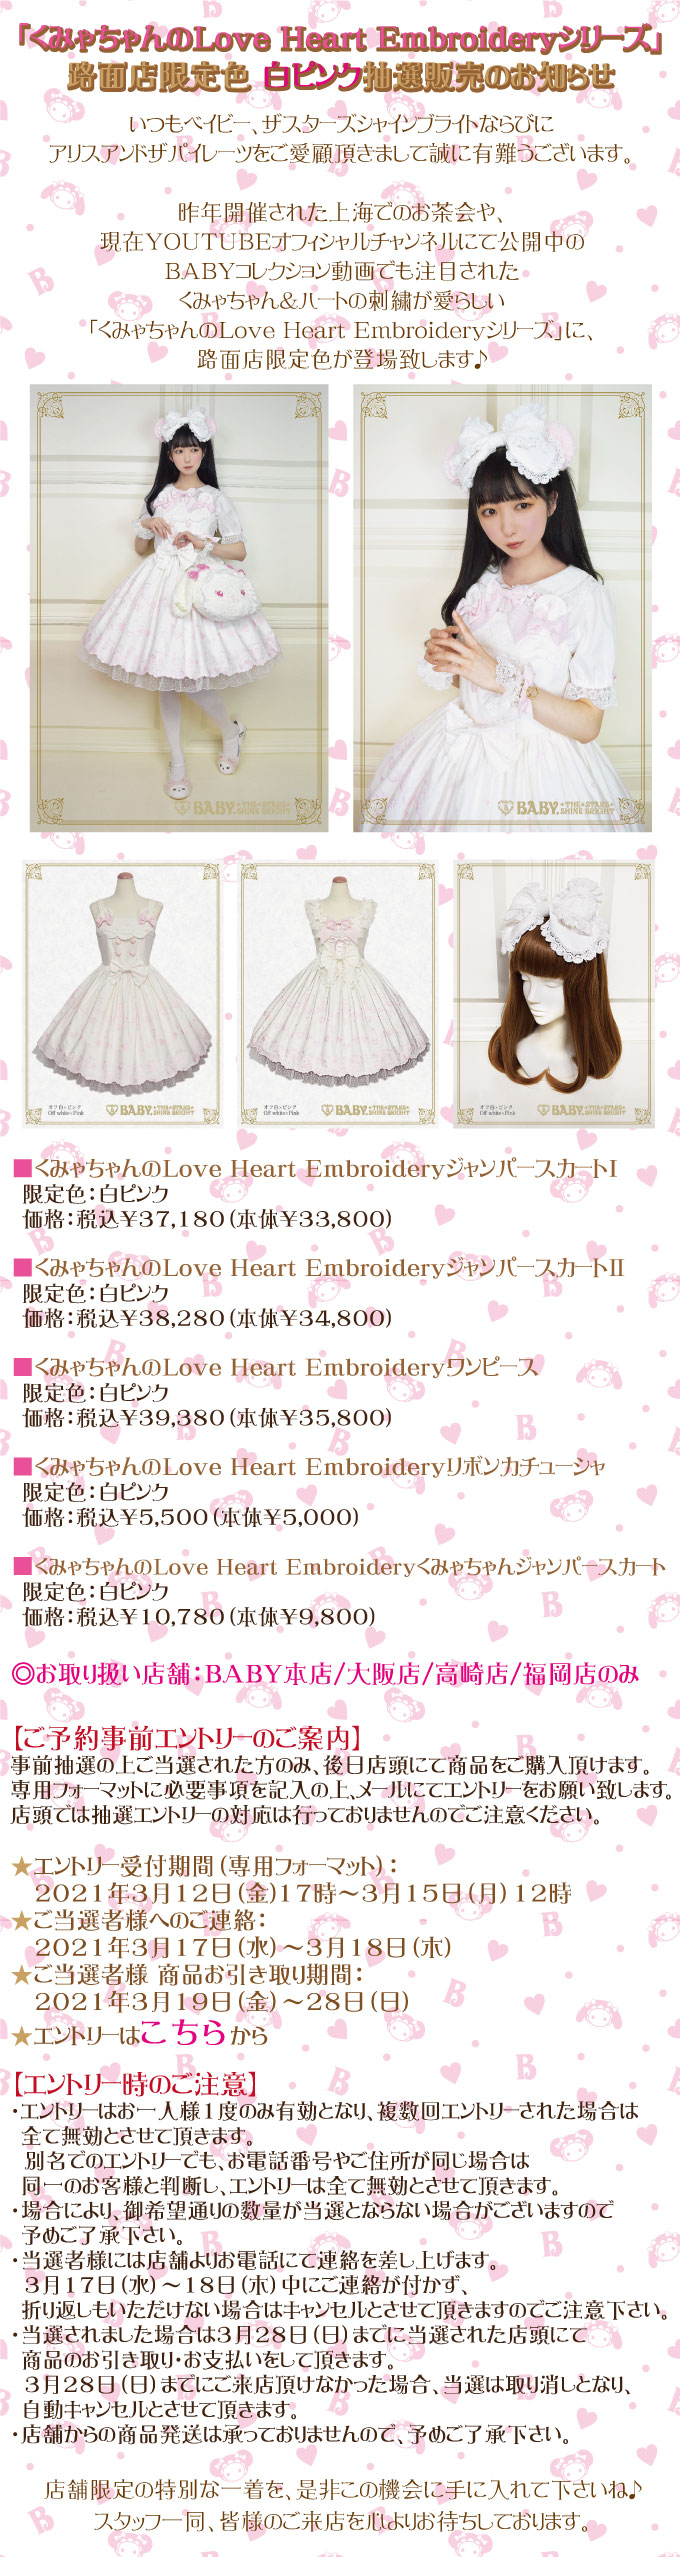 BABY『くみゃちゃんのLove Heart Embroideryシリーズ 路面店限定色 白ピンク』抽選販売のお知らせ | BABY, THE